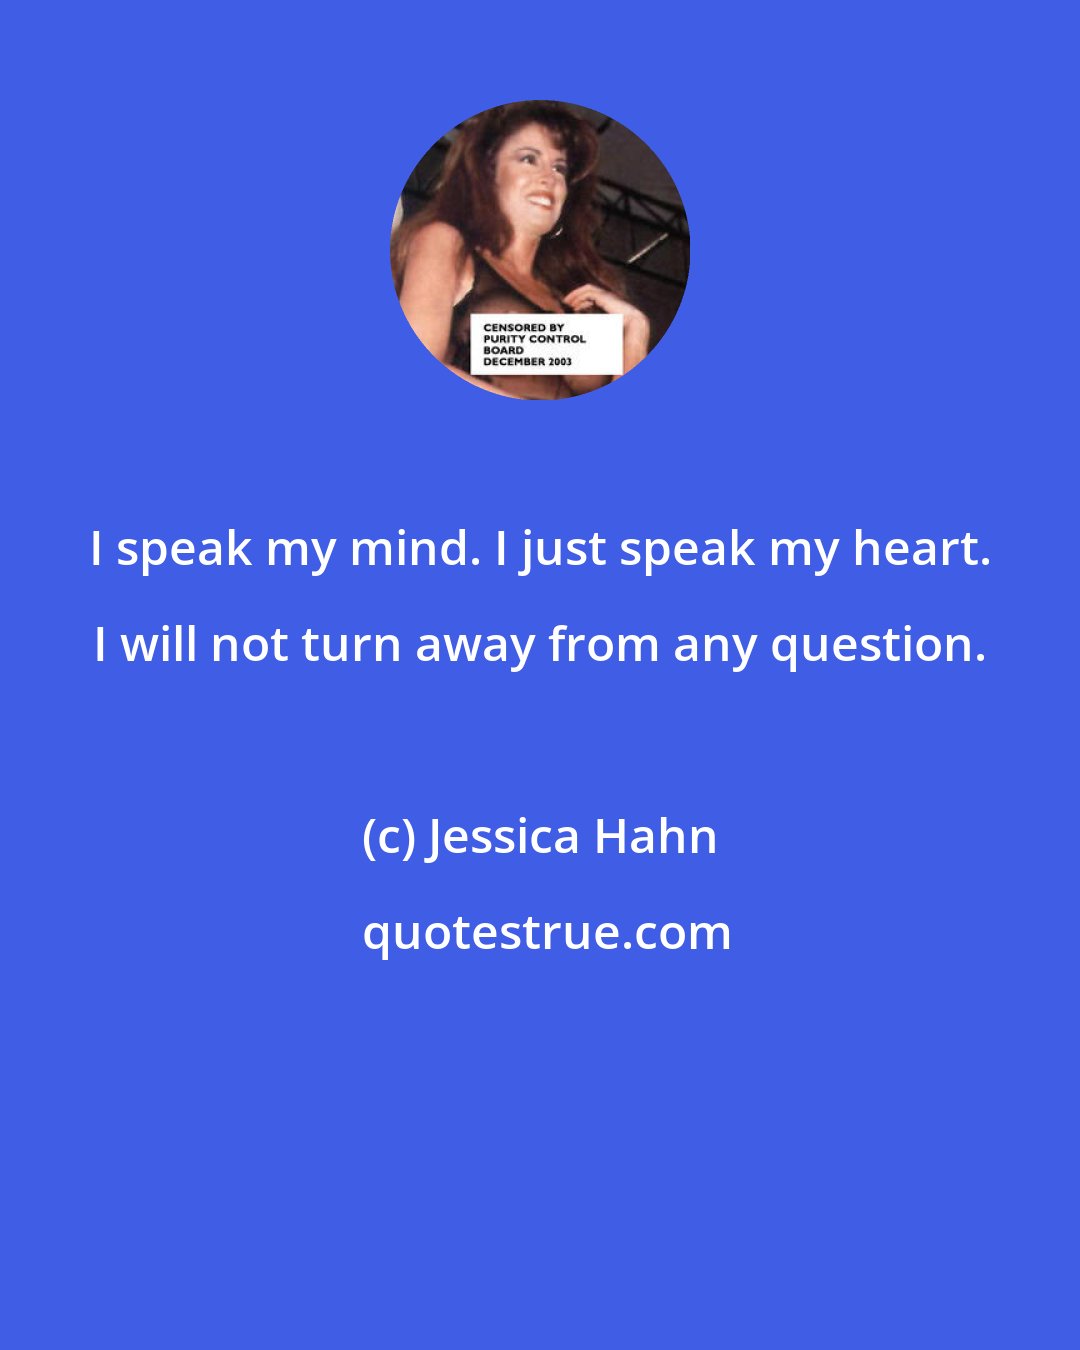 Jessica Hahn: I speak my mind. I just speak my heart. I will not turn away from any question.